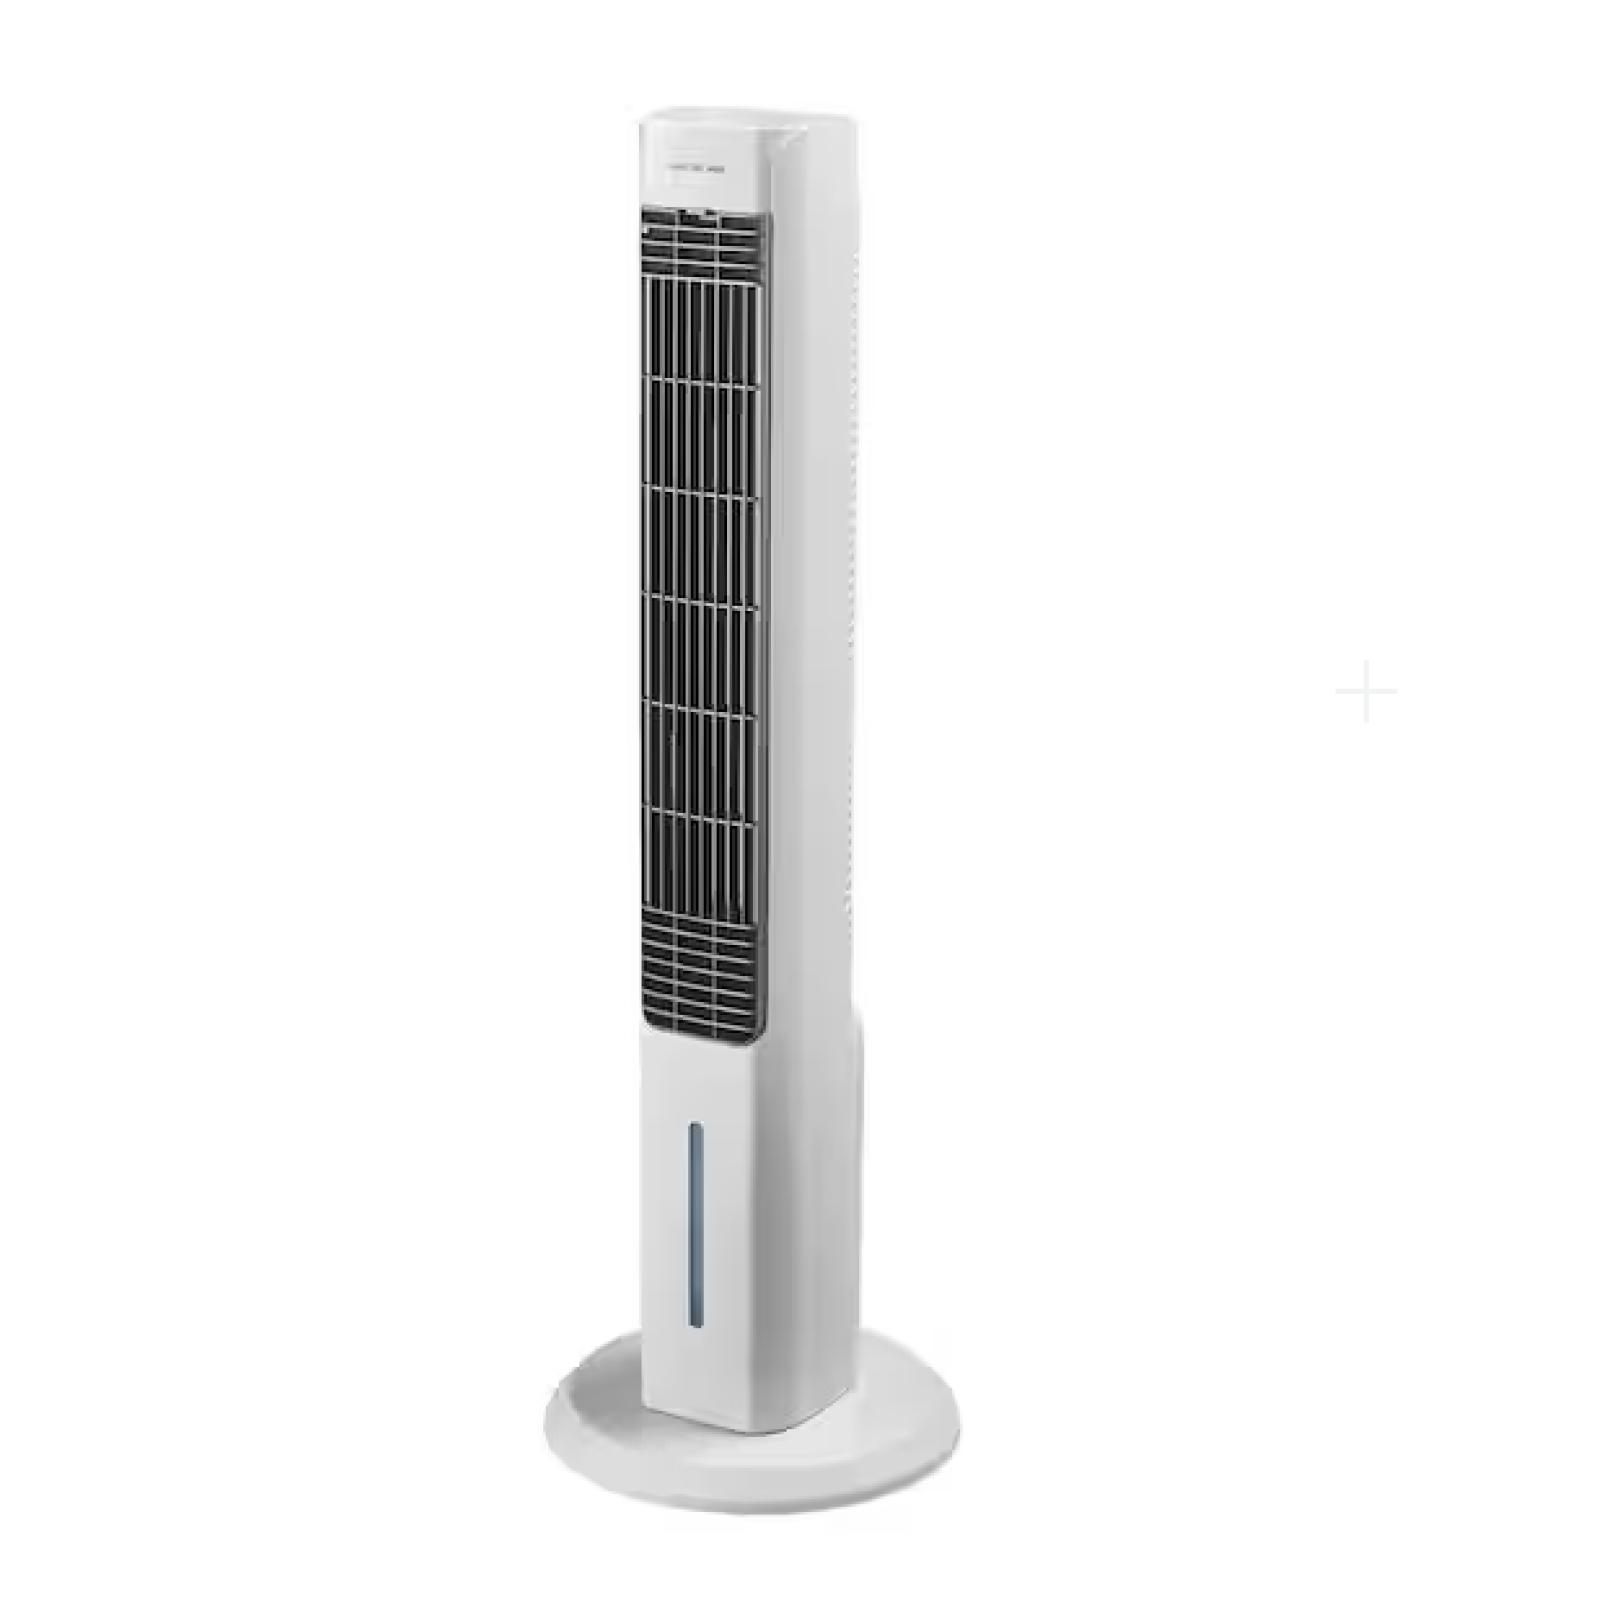 NEW! - ARCTIC AIR Oscillating 303 CFM 3-Speed Tower Portable Evaporative Cooler for 100 sq. ft. ( 6 UNITS)